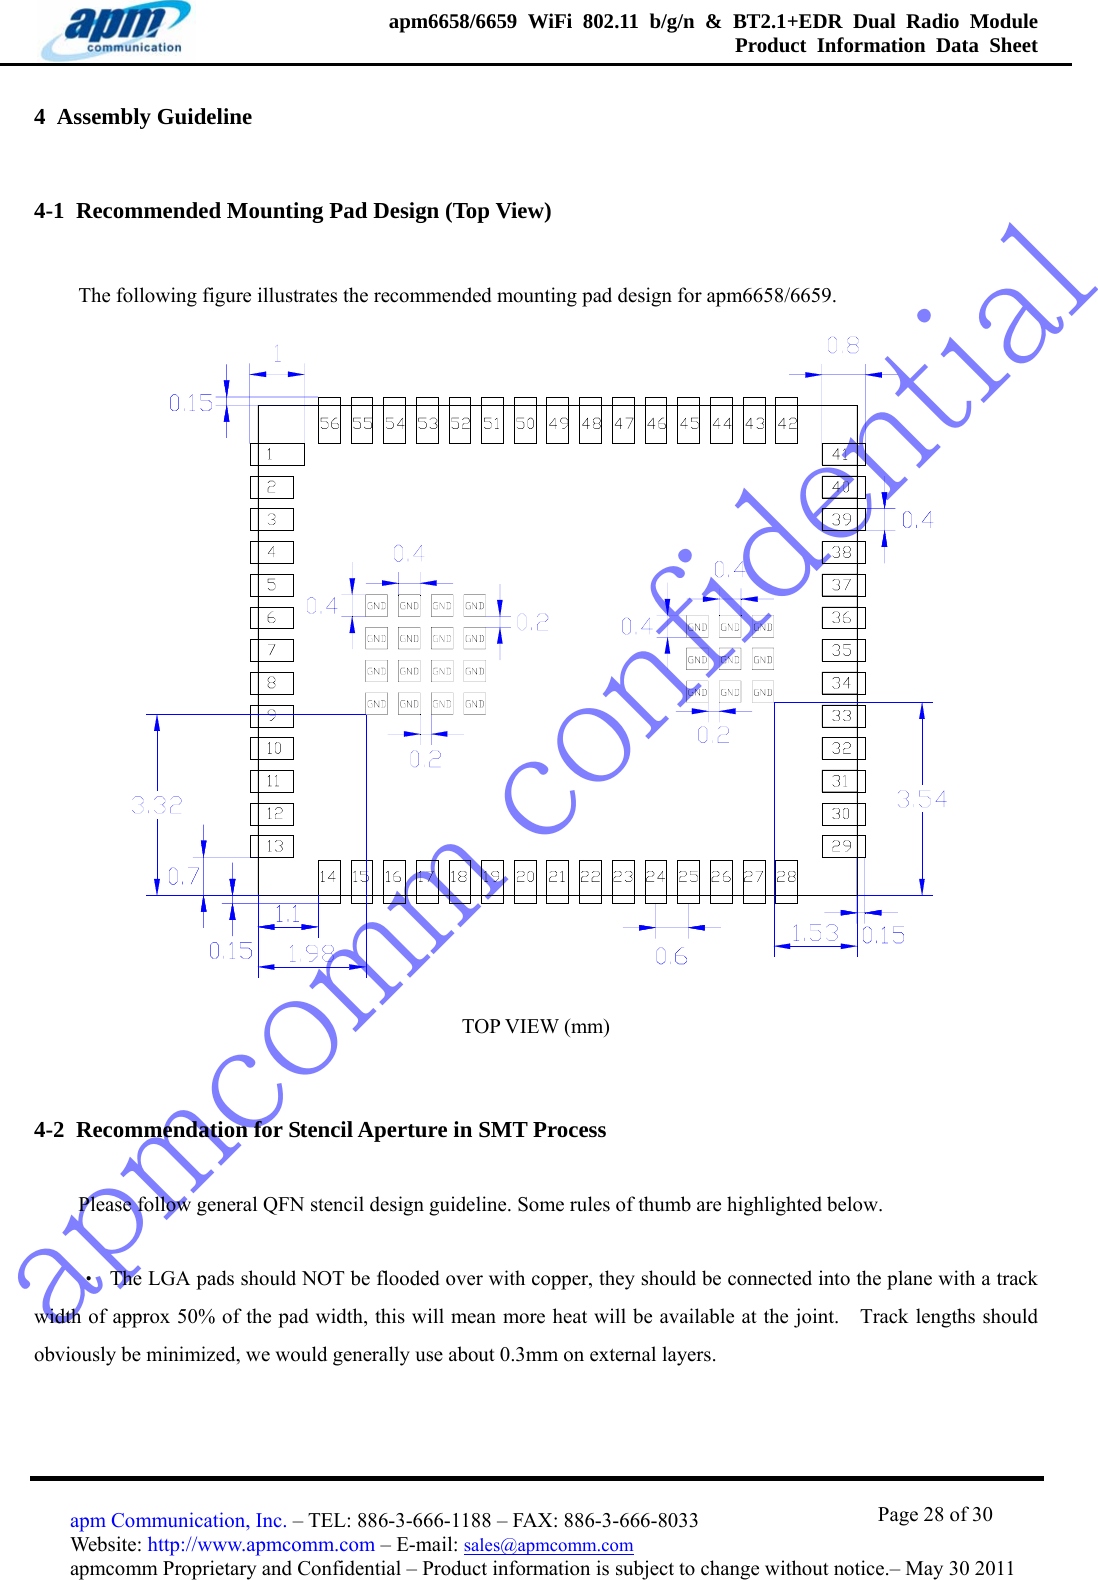 apmcomm confidentialapm6658/6659 WiFi 802.11 b/g/n &amp; BT2.1+EDR Dual Radio Module  Product Information Data Sheet                                       Page 28 of 30 apm Communication, Inc. – TEL: 886-3-666-1188 – FAX: 886-3-666-8033 Website: http://www.apmcomm.com – E-mail: sales@apmcomm.com  apmcomm Proprietary and Confidential – Product information is subject to change without notice.– May 30 2011 4  Assembly Guideline 4-1  Recommended Mounting Pad Design (Top View) The following figure illustrates the recommended mounting pad design for apm6658/6659.    TOP VIEW (mm) 4-2  Recommendation for Stencil Aperture in SMT Process Please follow general QFN stencil design guideline. Some rules of thumb are highlighted below.   ‧  The LGA pads should NOT be flooded over with copper, they should be connected into the plane with a track width of approx 50% of the pad width, this will mean more heat will be available at the joint.    Track lengths should obviously be minimized, we would generally use about 0.3mm on external layers. 